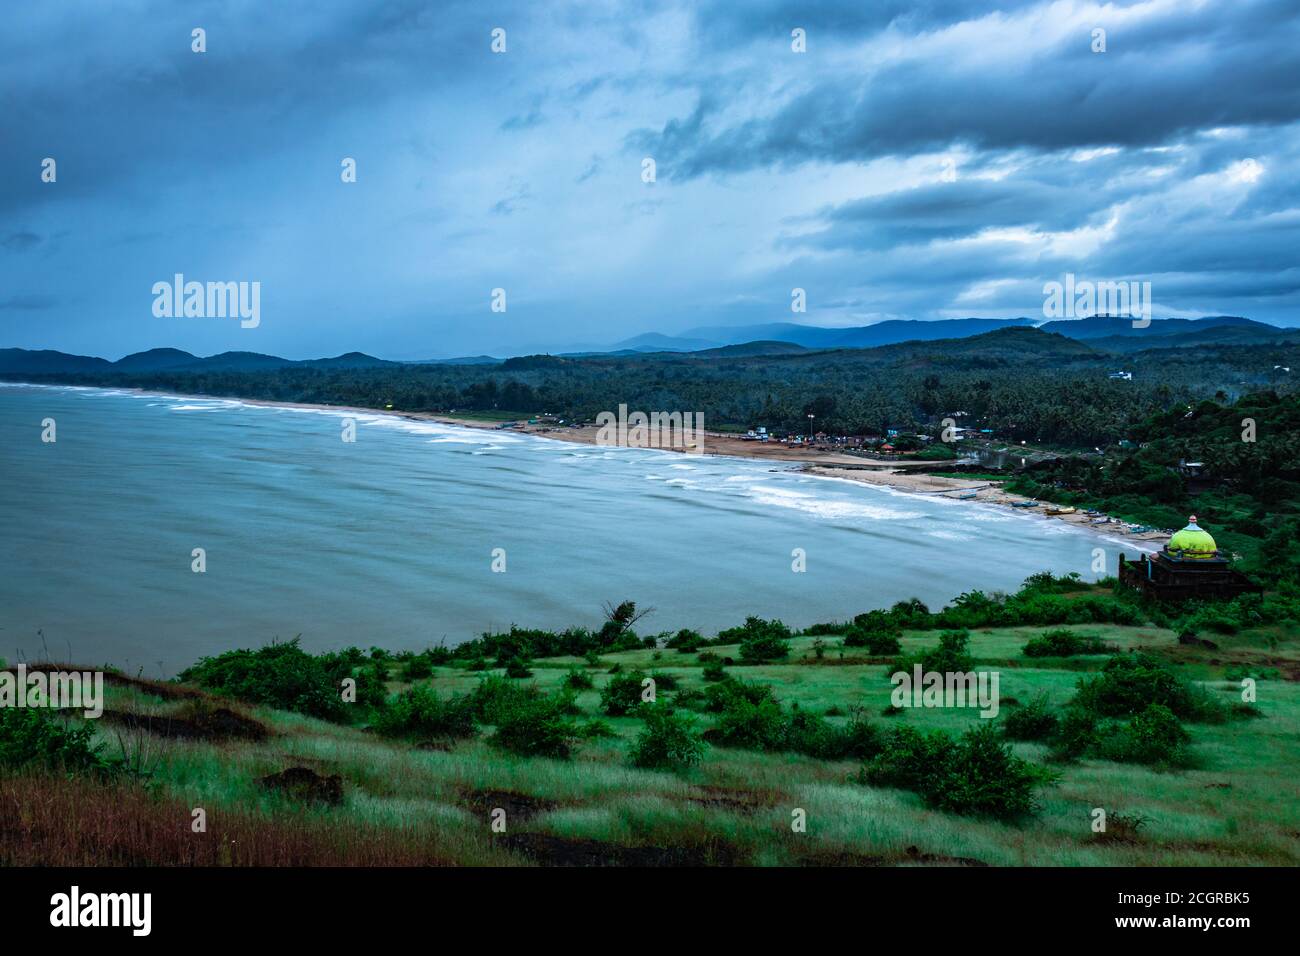 mountain top view of sea shore with clouded sky at evening image is taken at gokarna karnataka india. Stock Photo